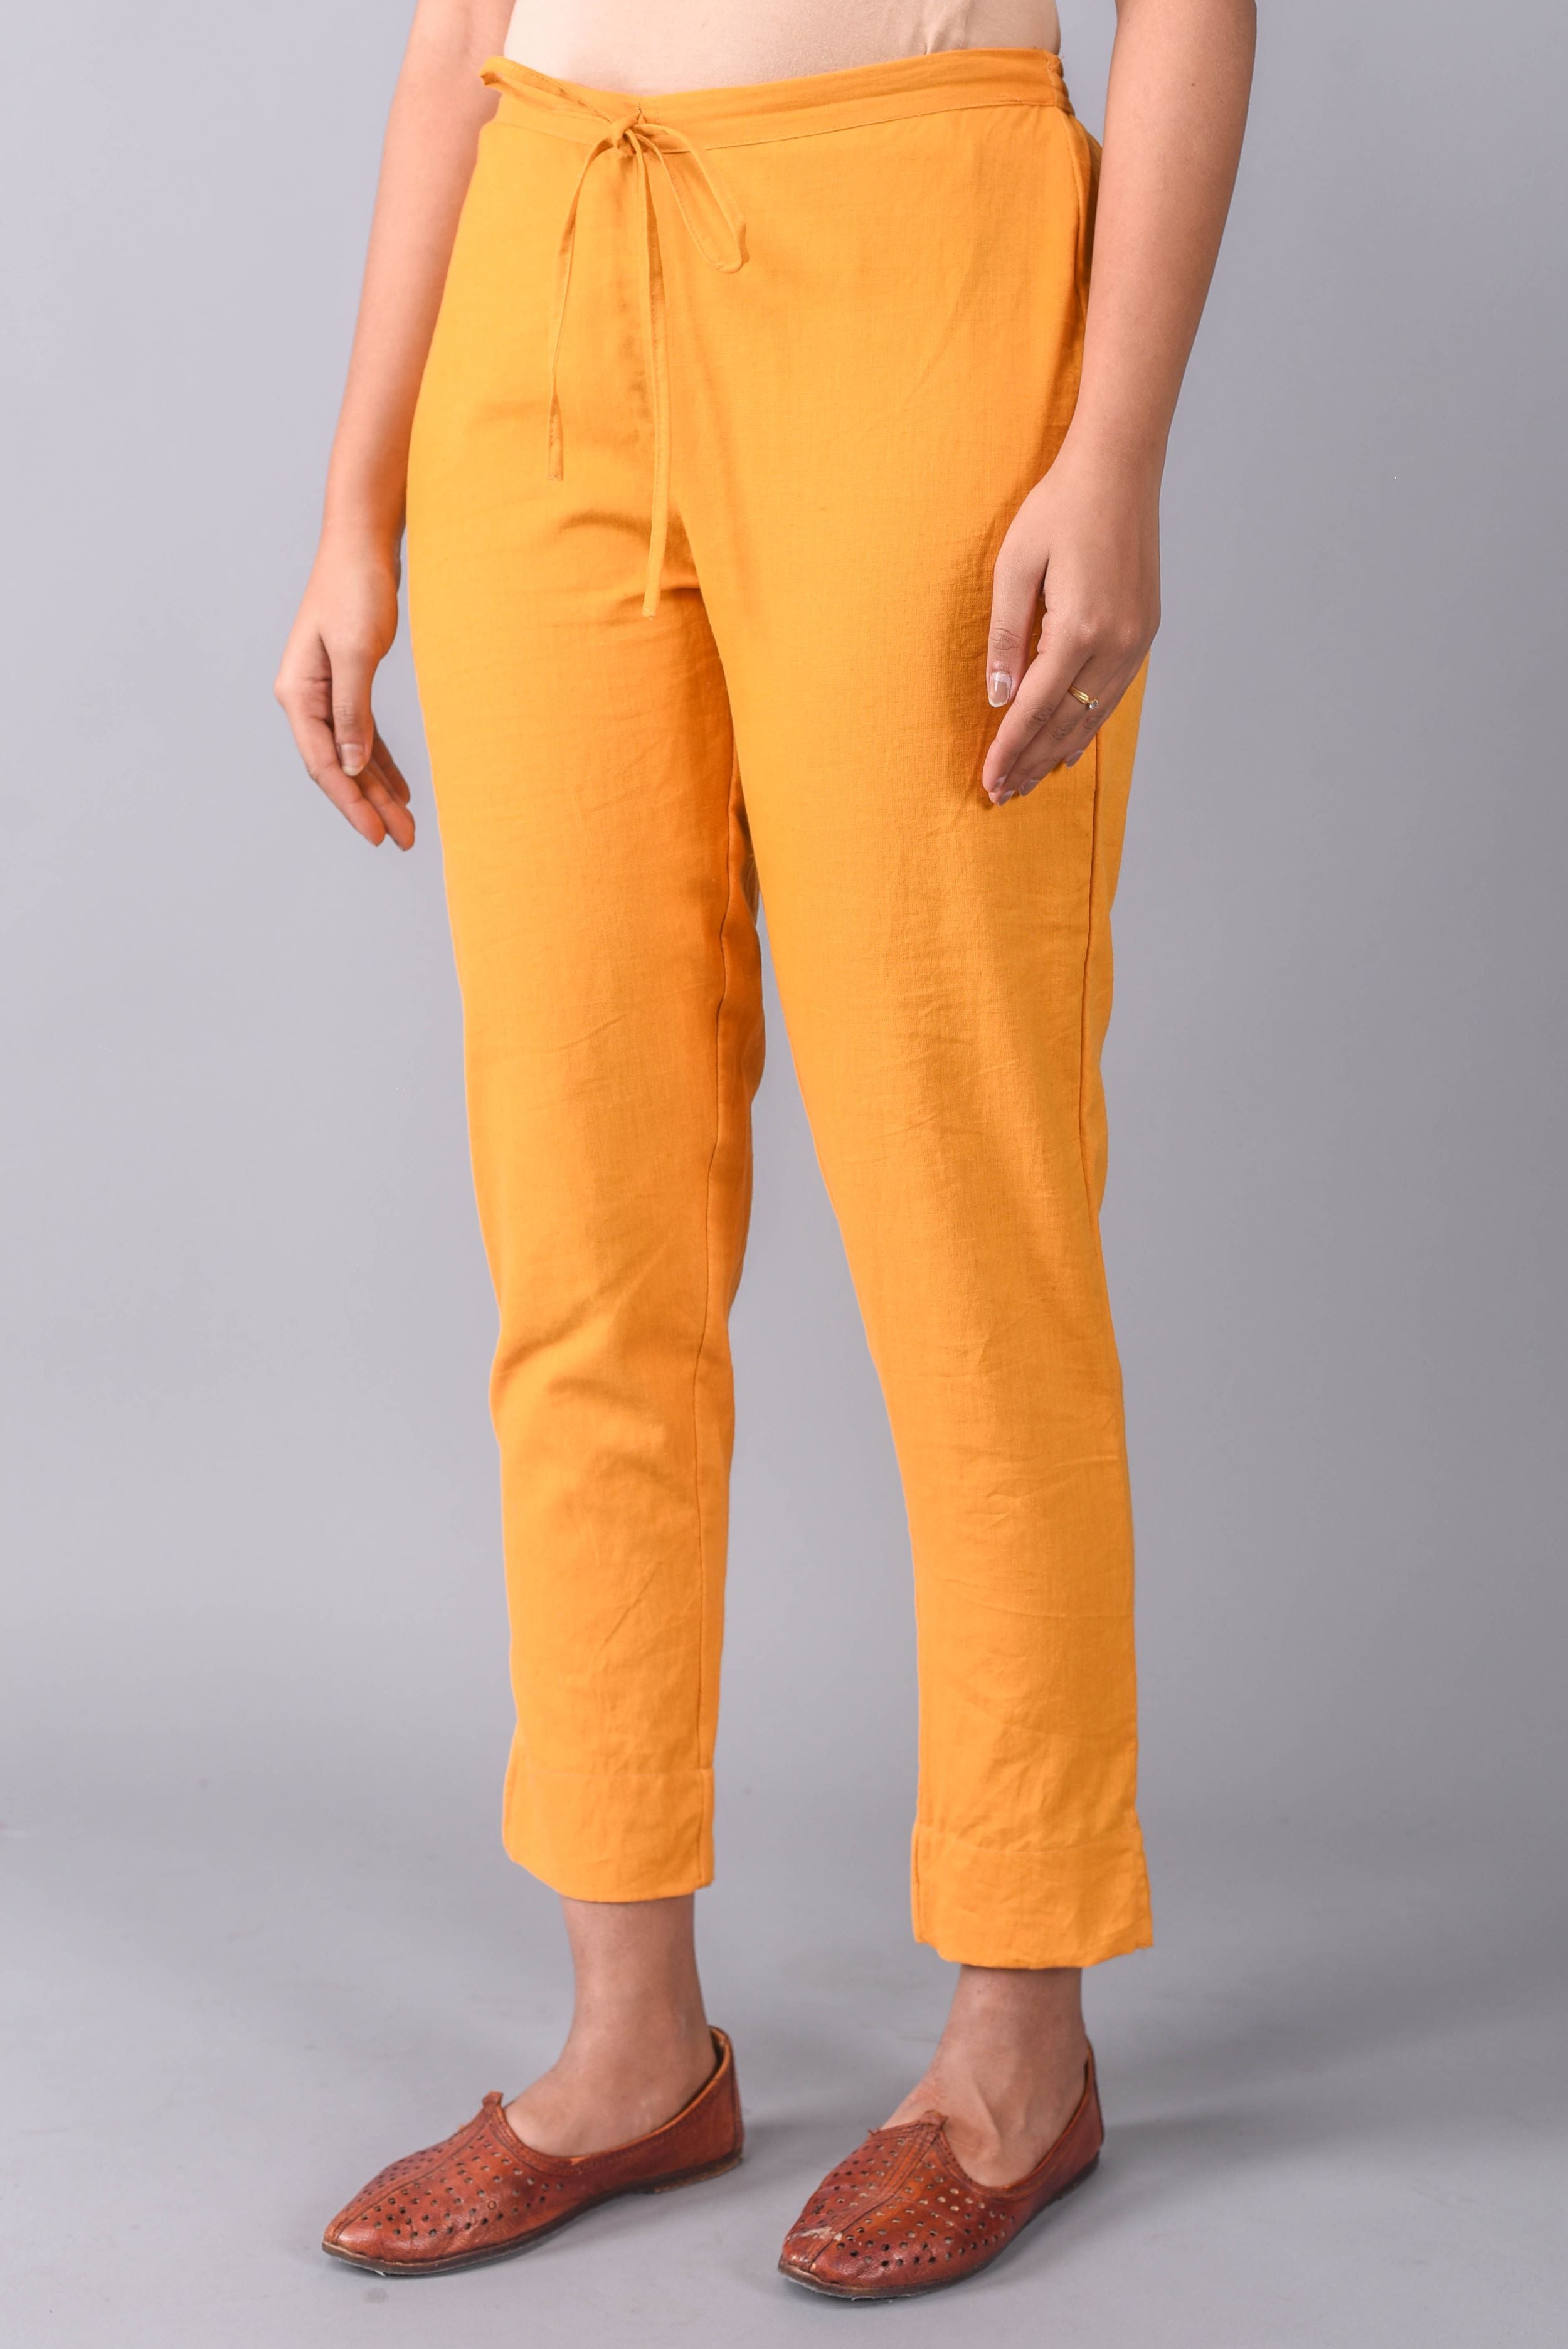 Buy Vasavi Women Yellow Slim fit Cigarette pants Online at Low Prices in  India - Paytmmall.com